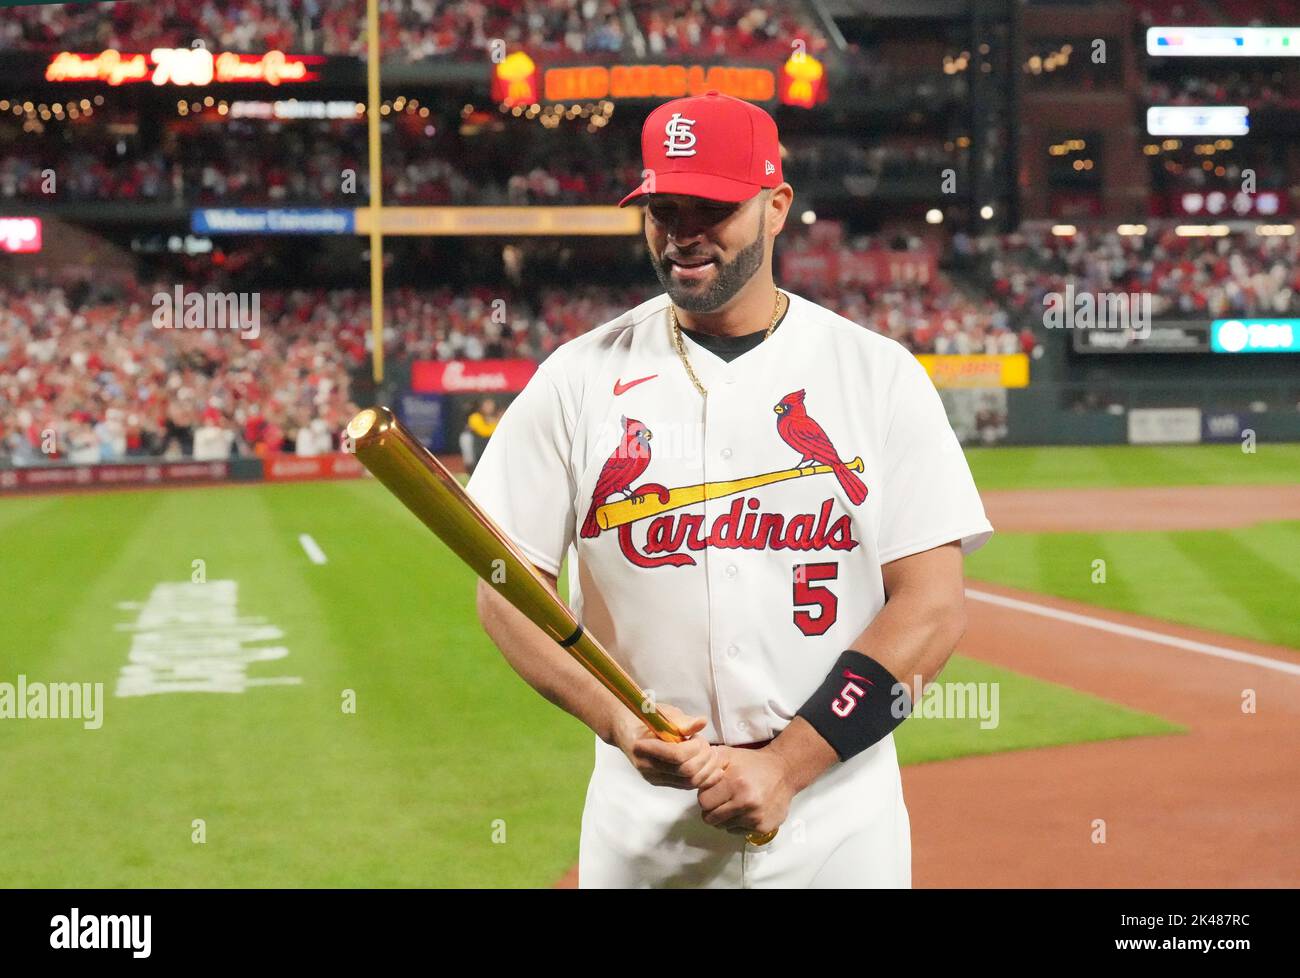 The year Pujols only played the Pirates